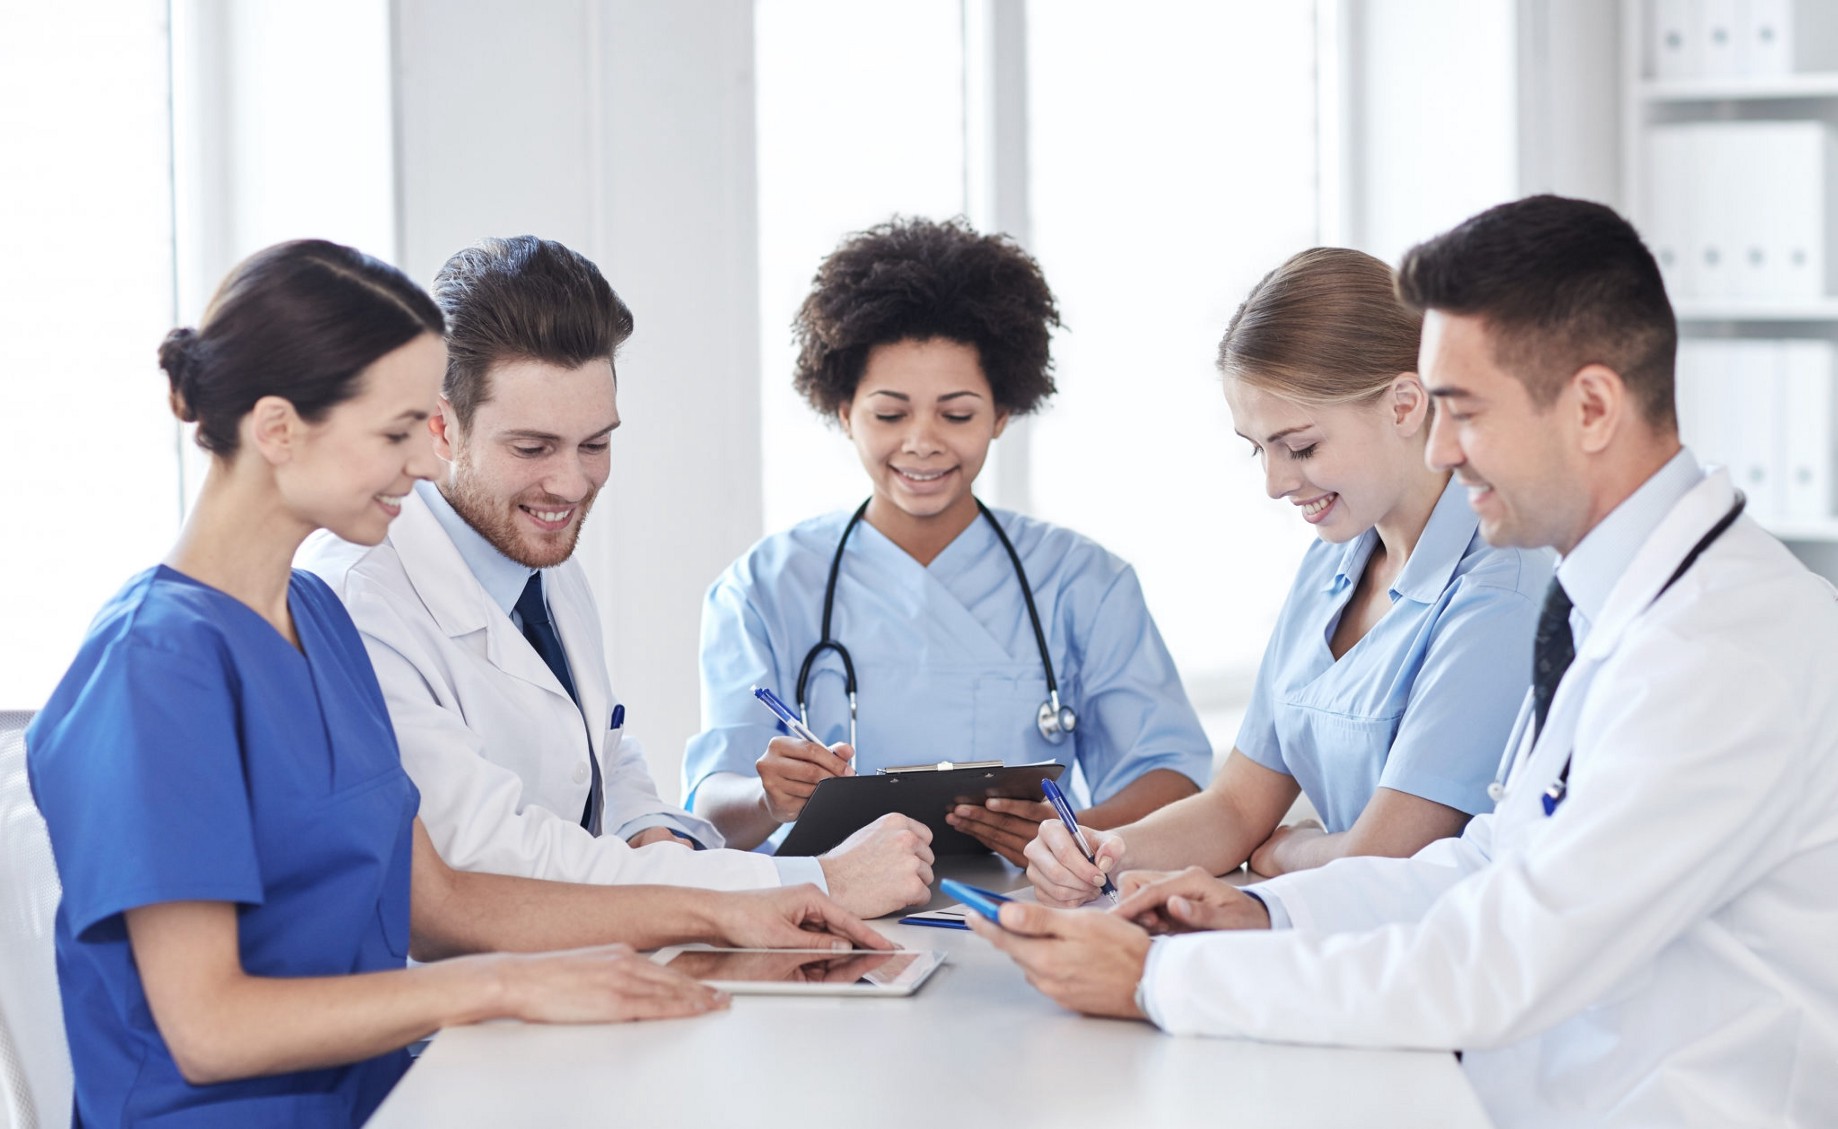 doctors How to Share Patient Lab Results via Text in a HIPAA Compliant Way